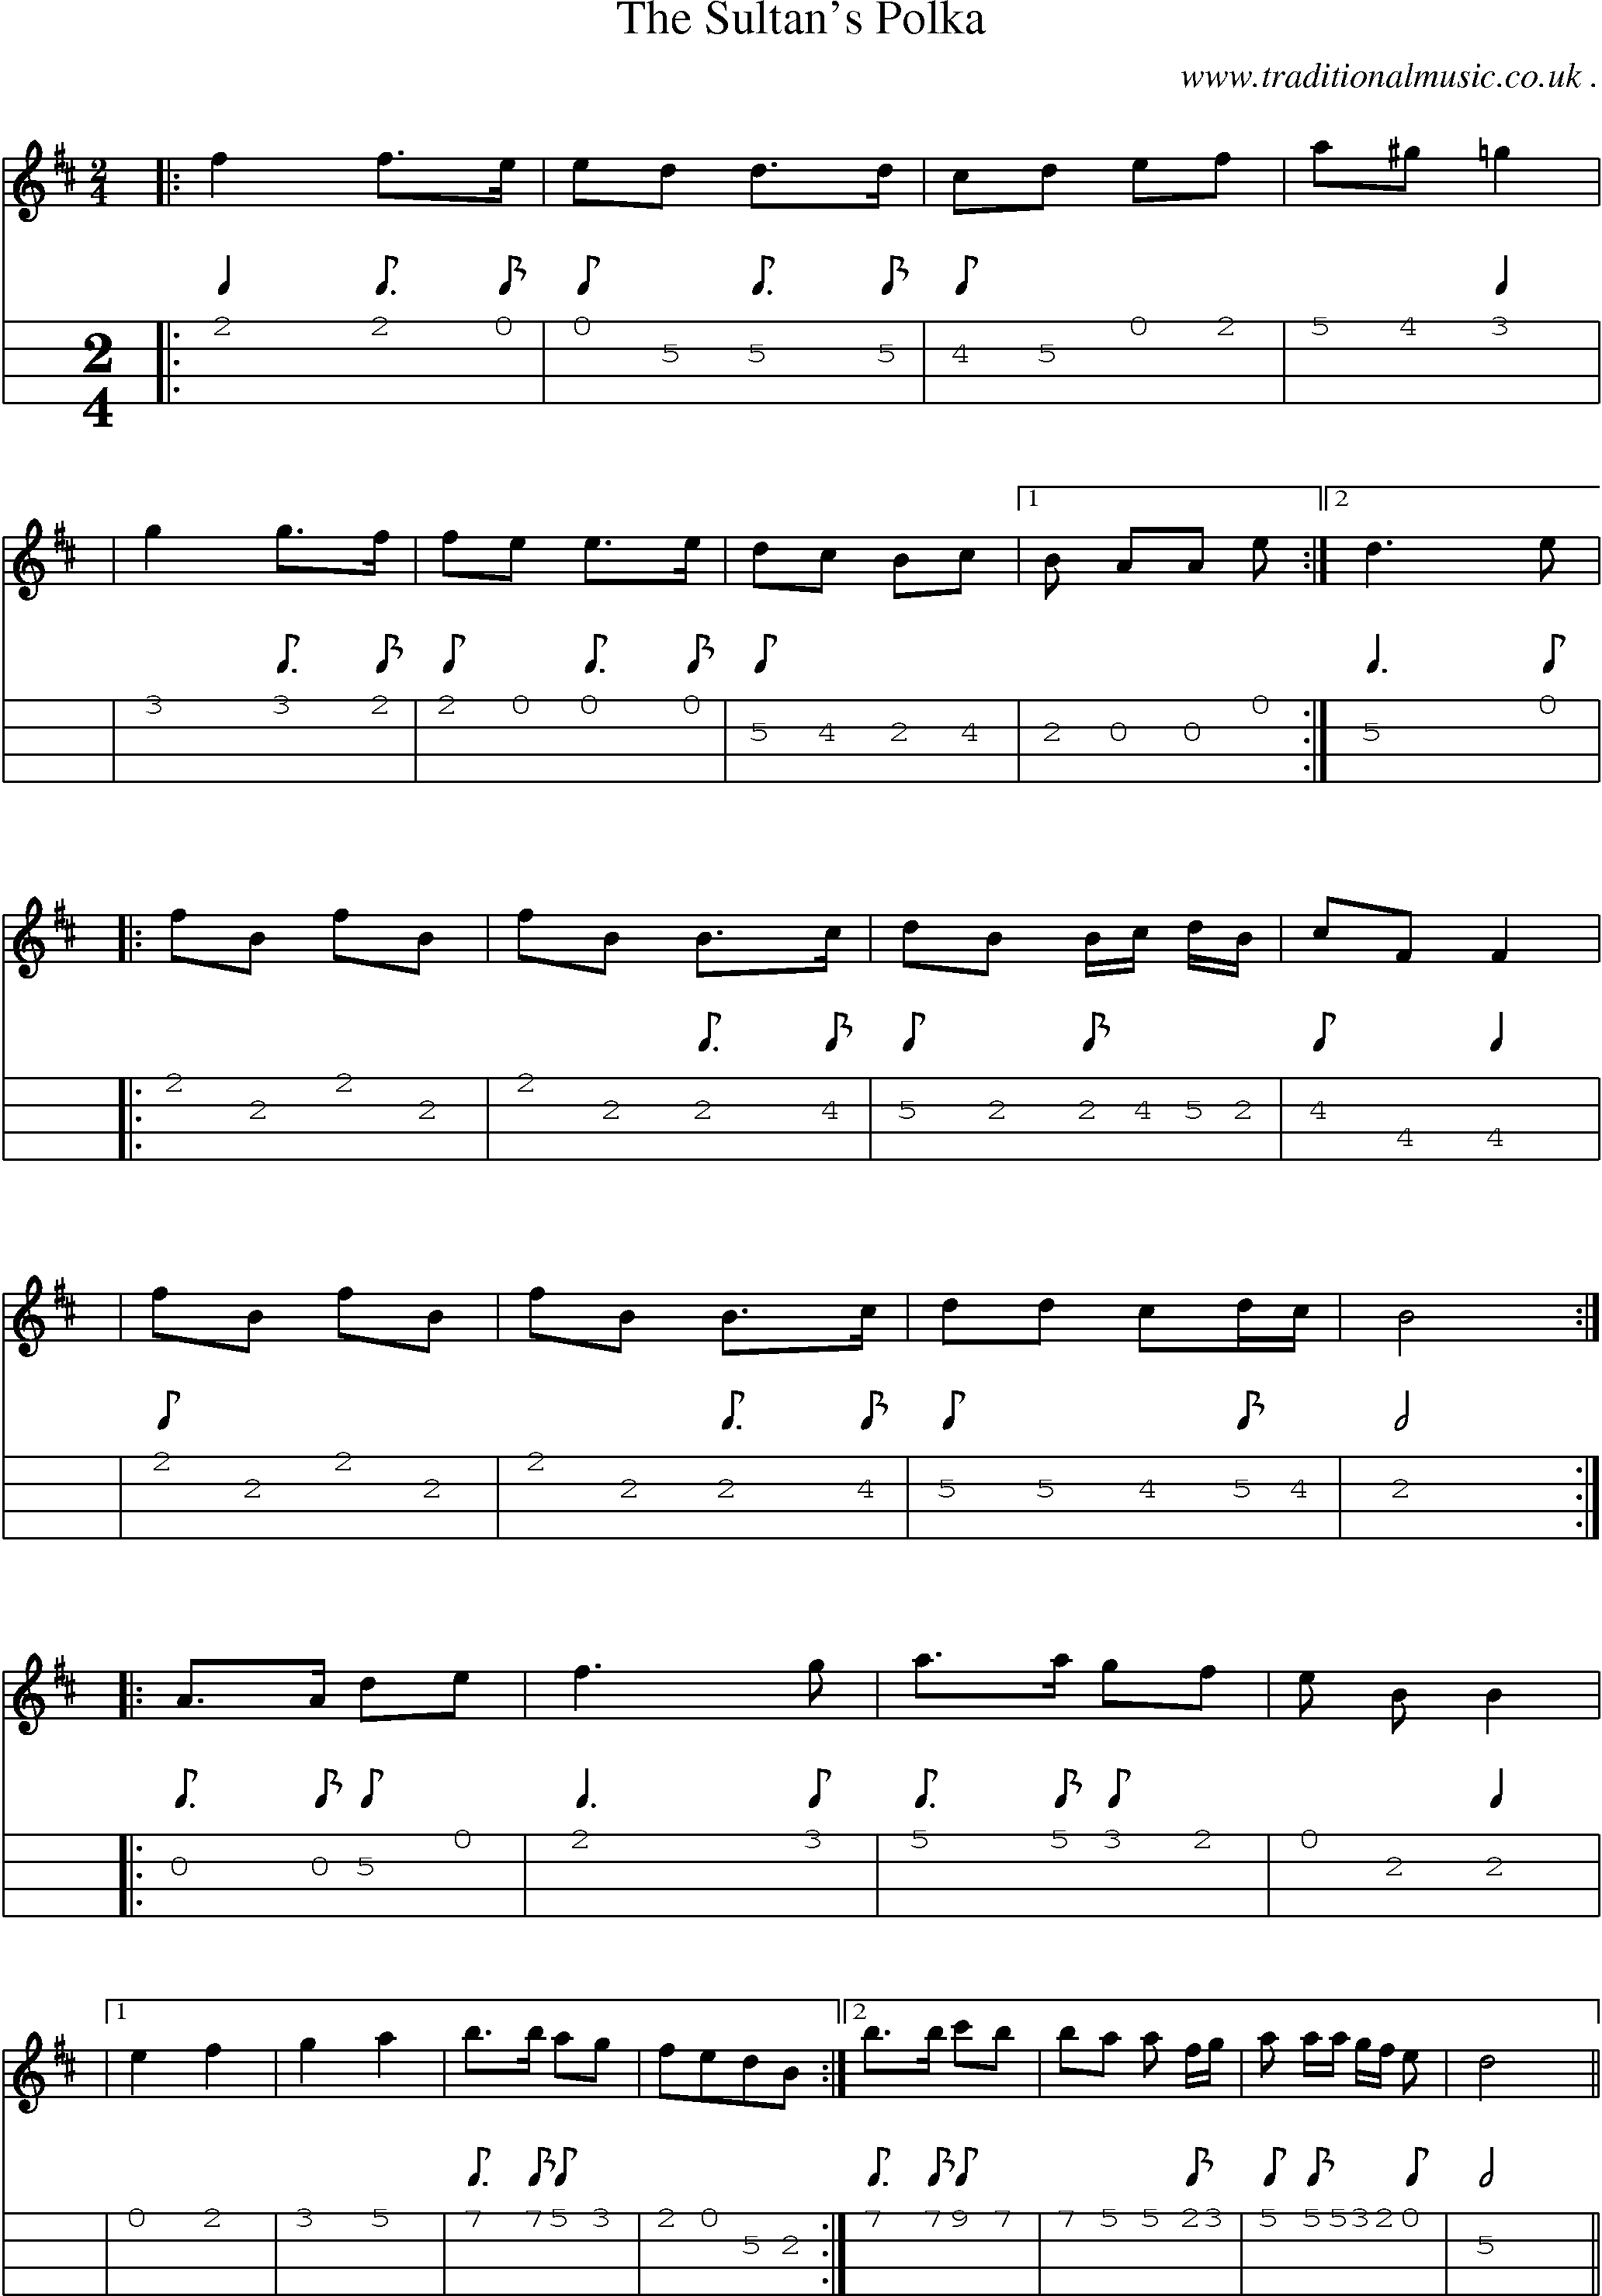 Sheet-Music and Mandolin Tabs for The Sultans Polka